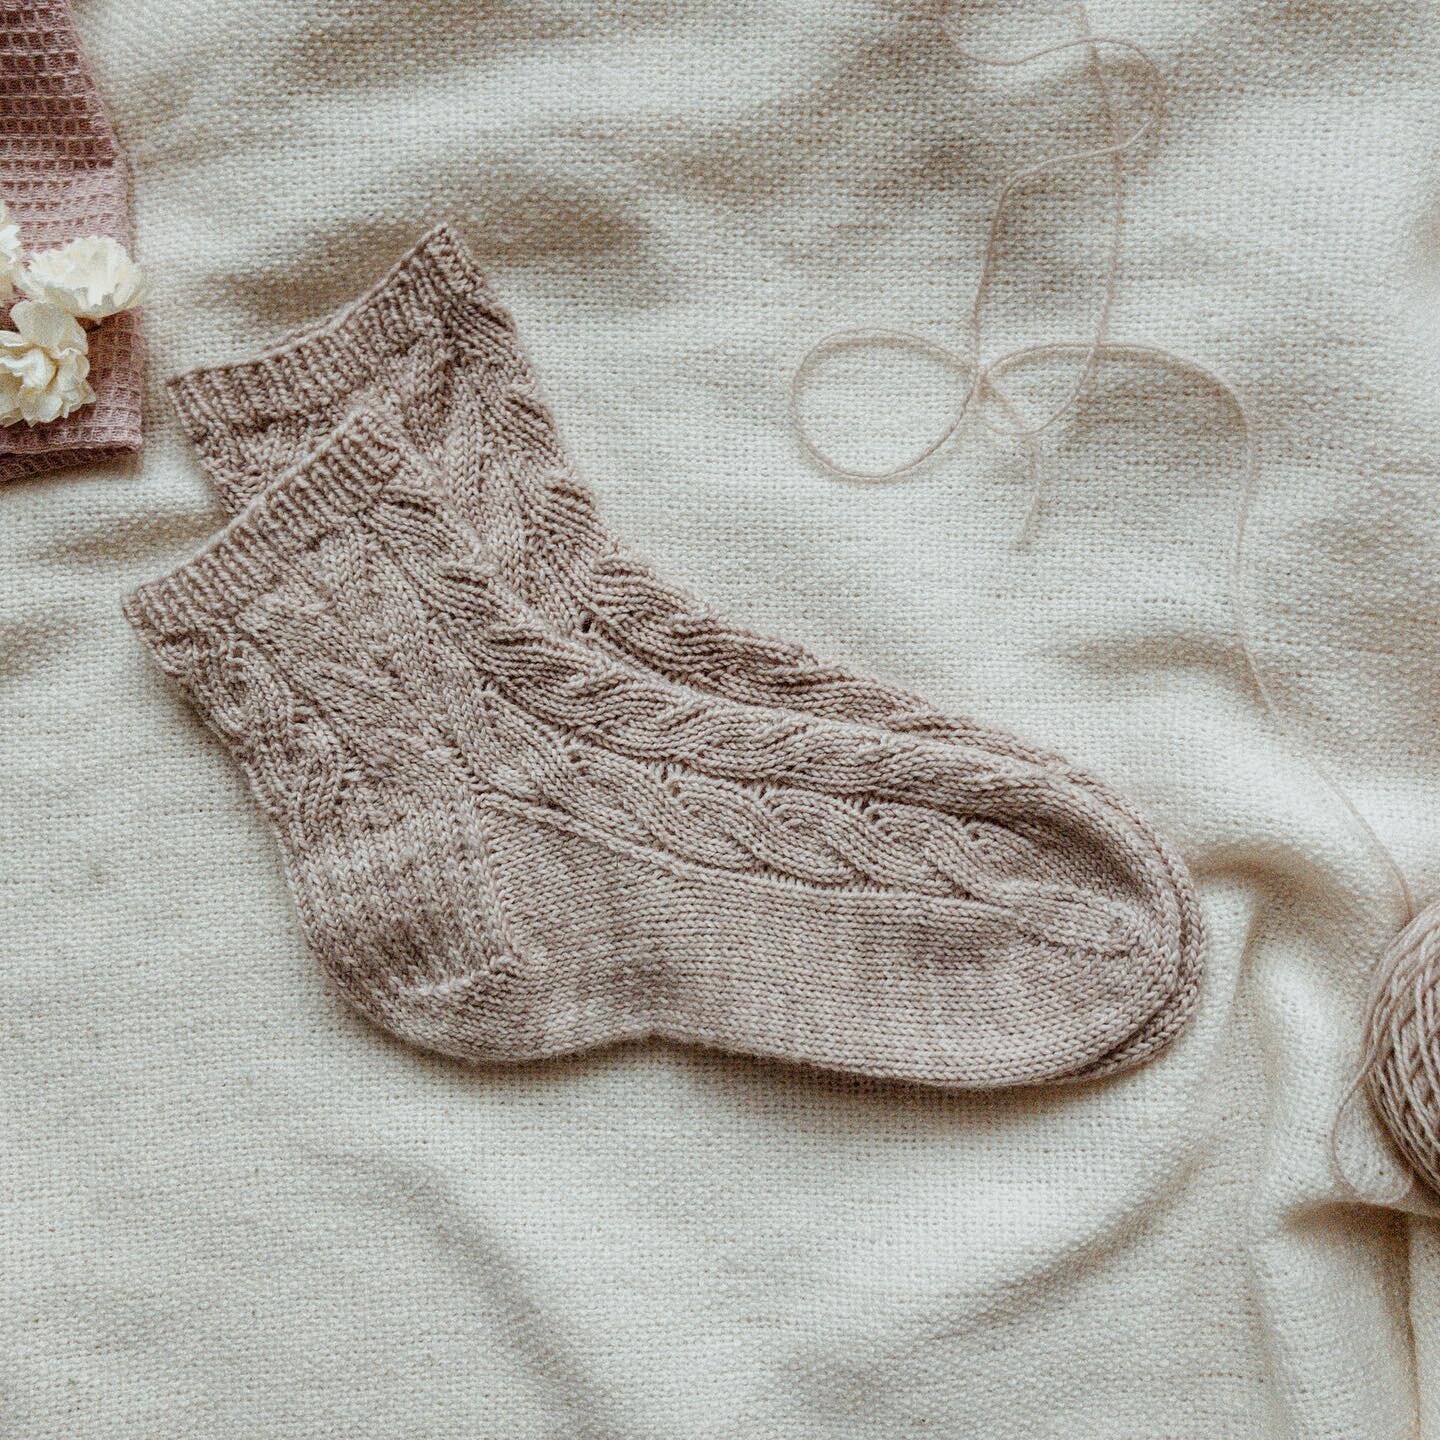 My second Bronte Socks pair - finished! Combination of grey color &amp; delicate cables is a synonym of classic for me - and I can see lots of outfits that these will easily fit into! 
⠀⠀⠀⠀⠀⠀⠀⠀⠀
As the spring is starting - are socks still making it i